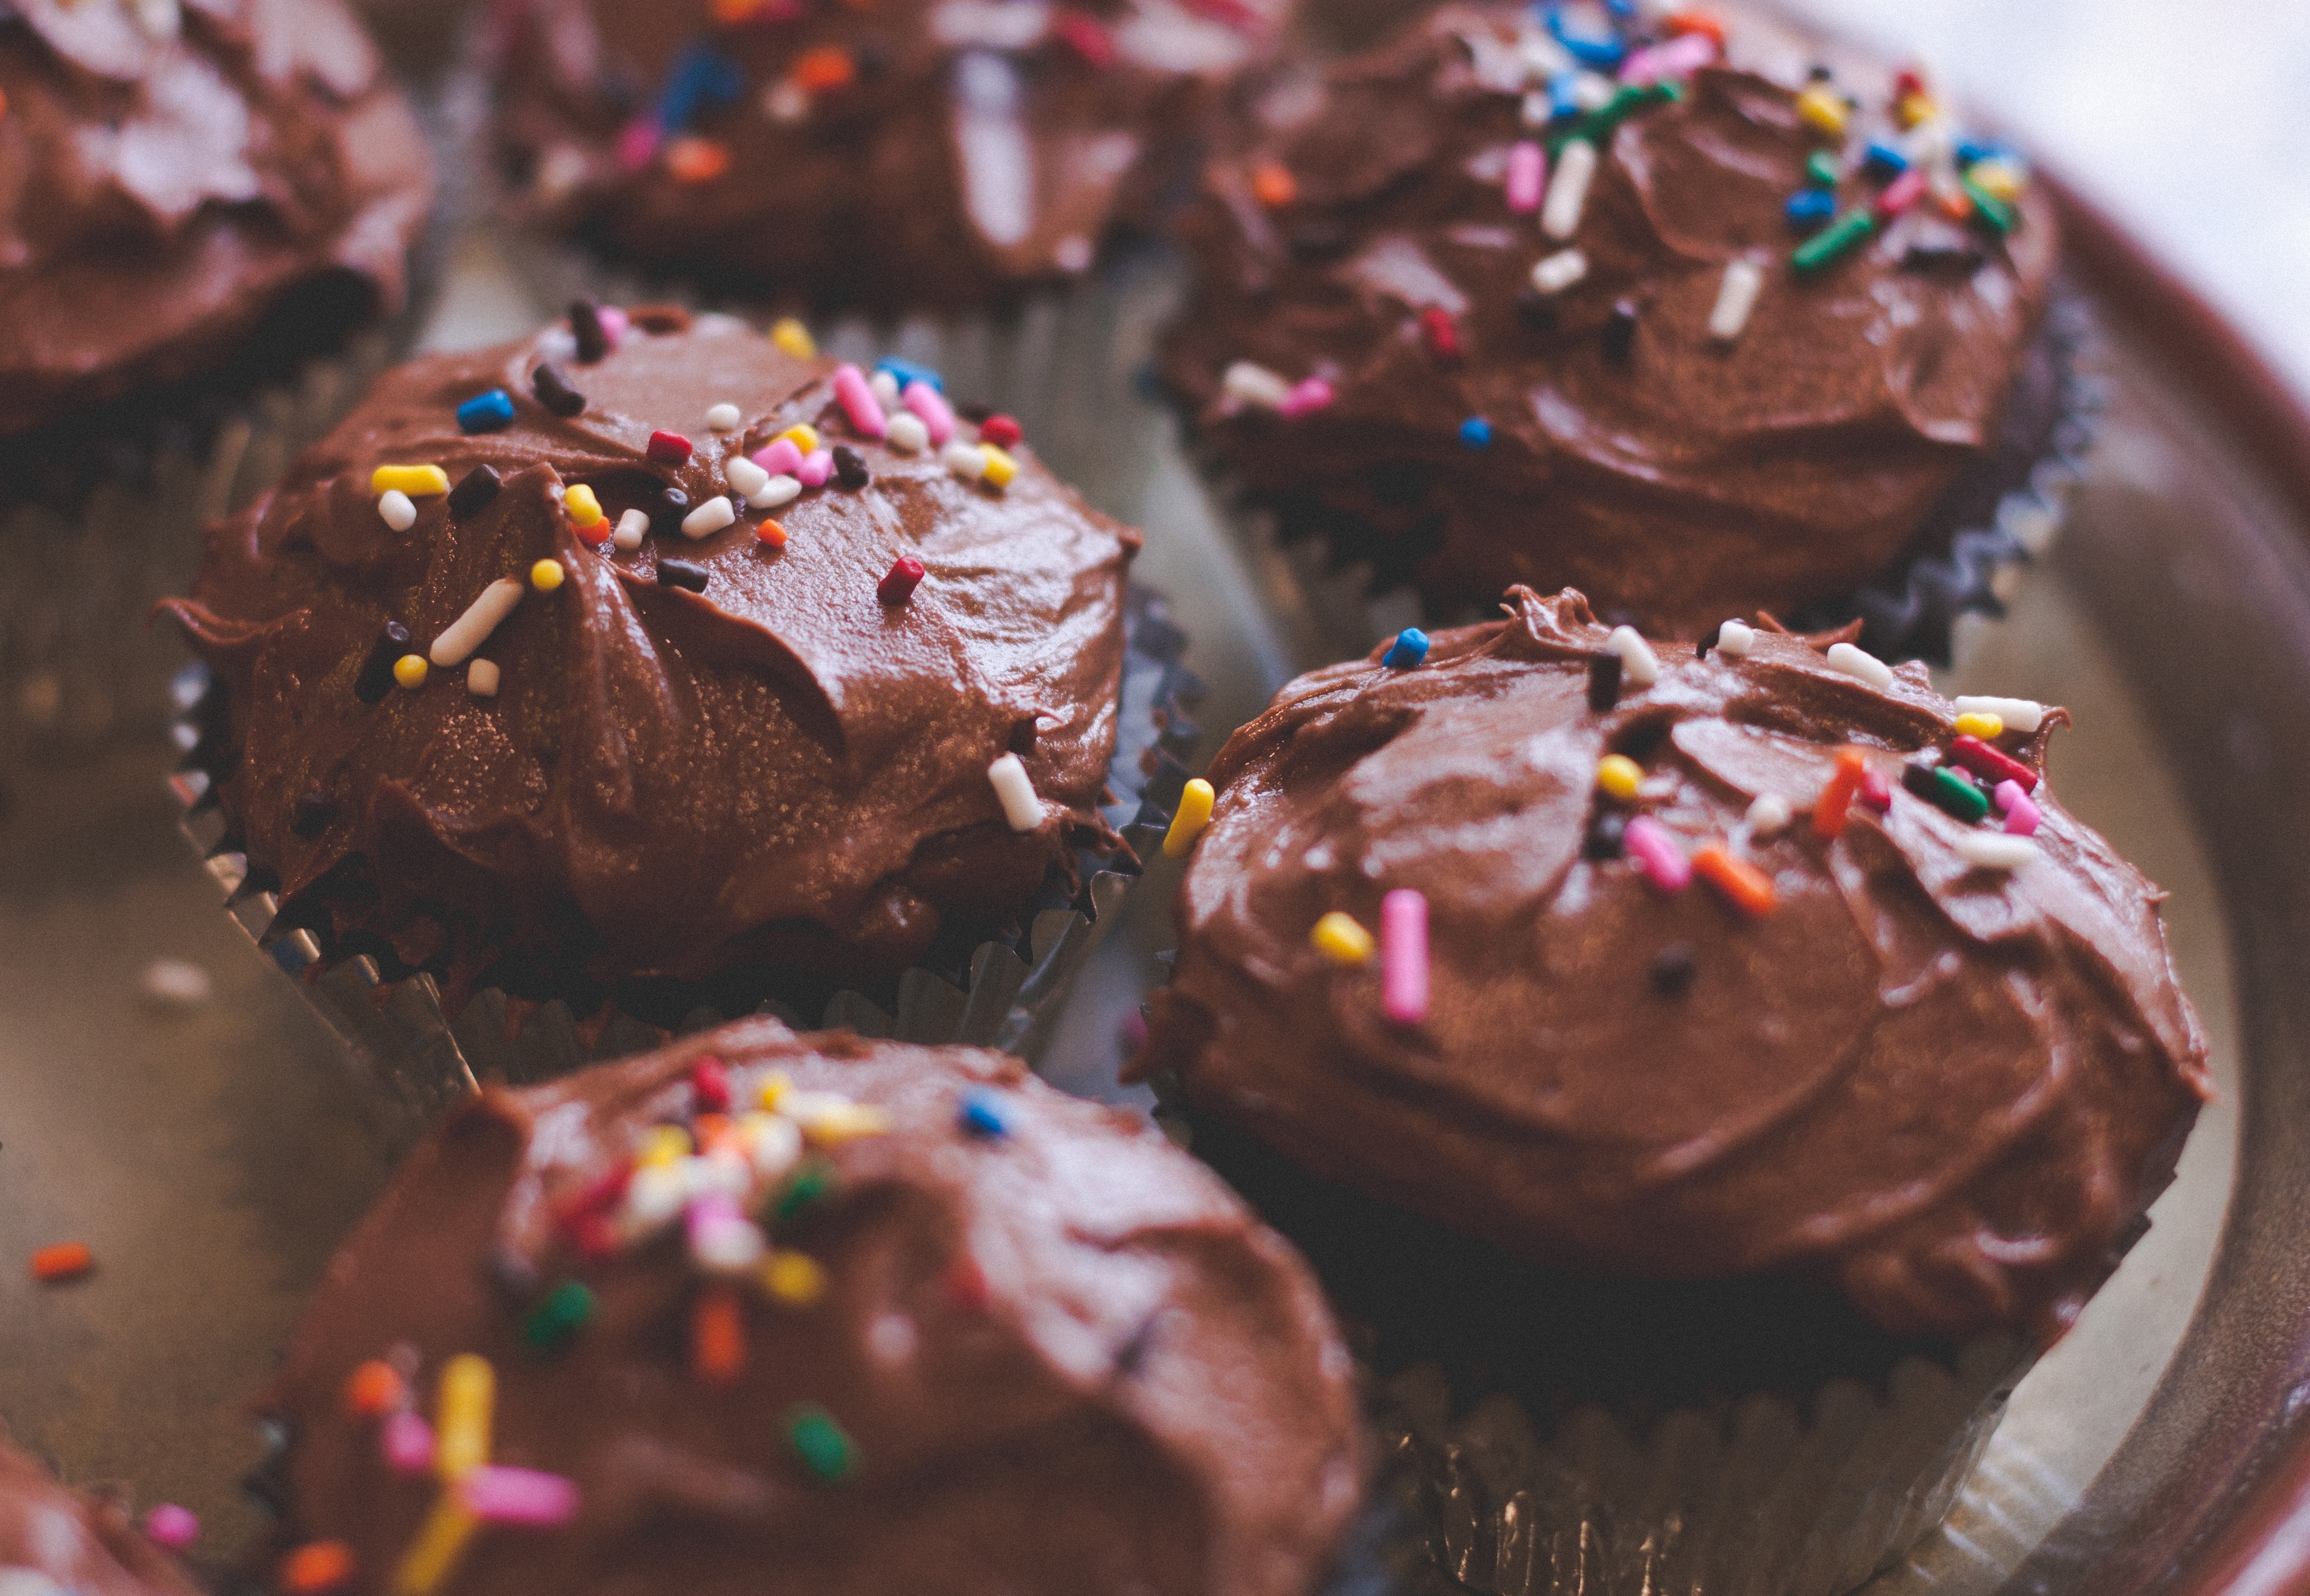 81802 download wallpaper food, chocolate, cupcakes, glaze, confetti screensavers and pictures for free